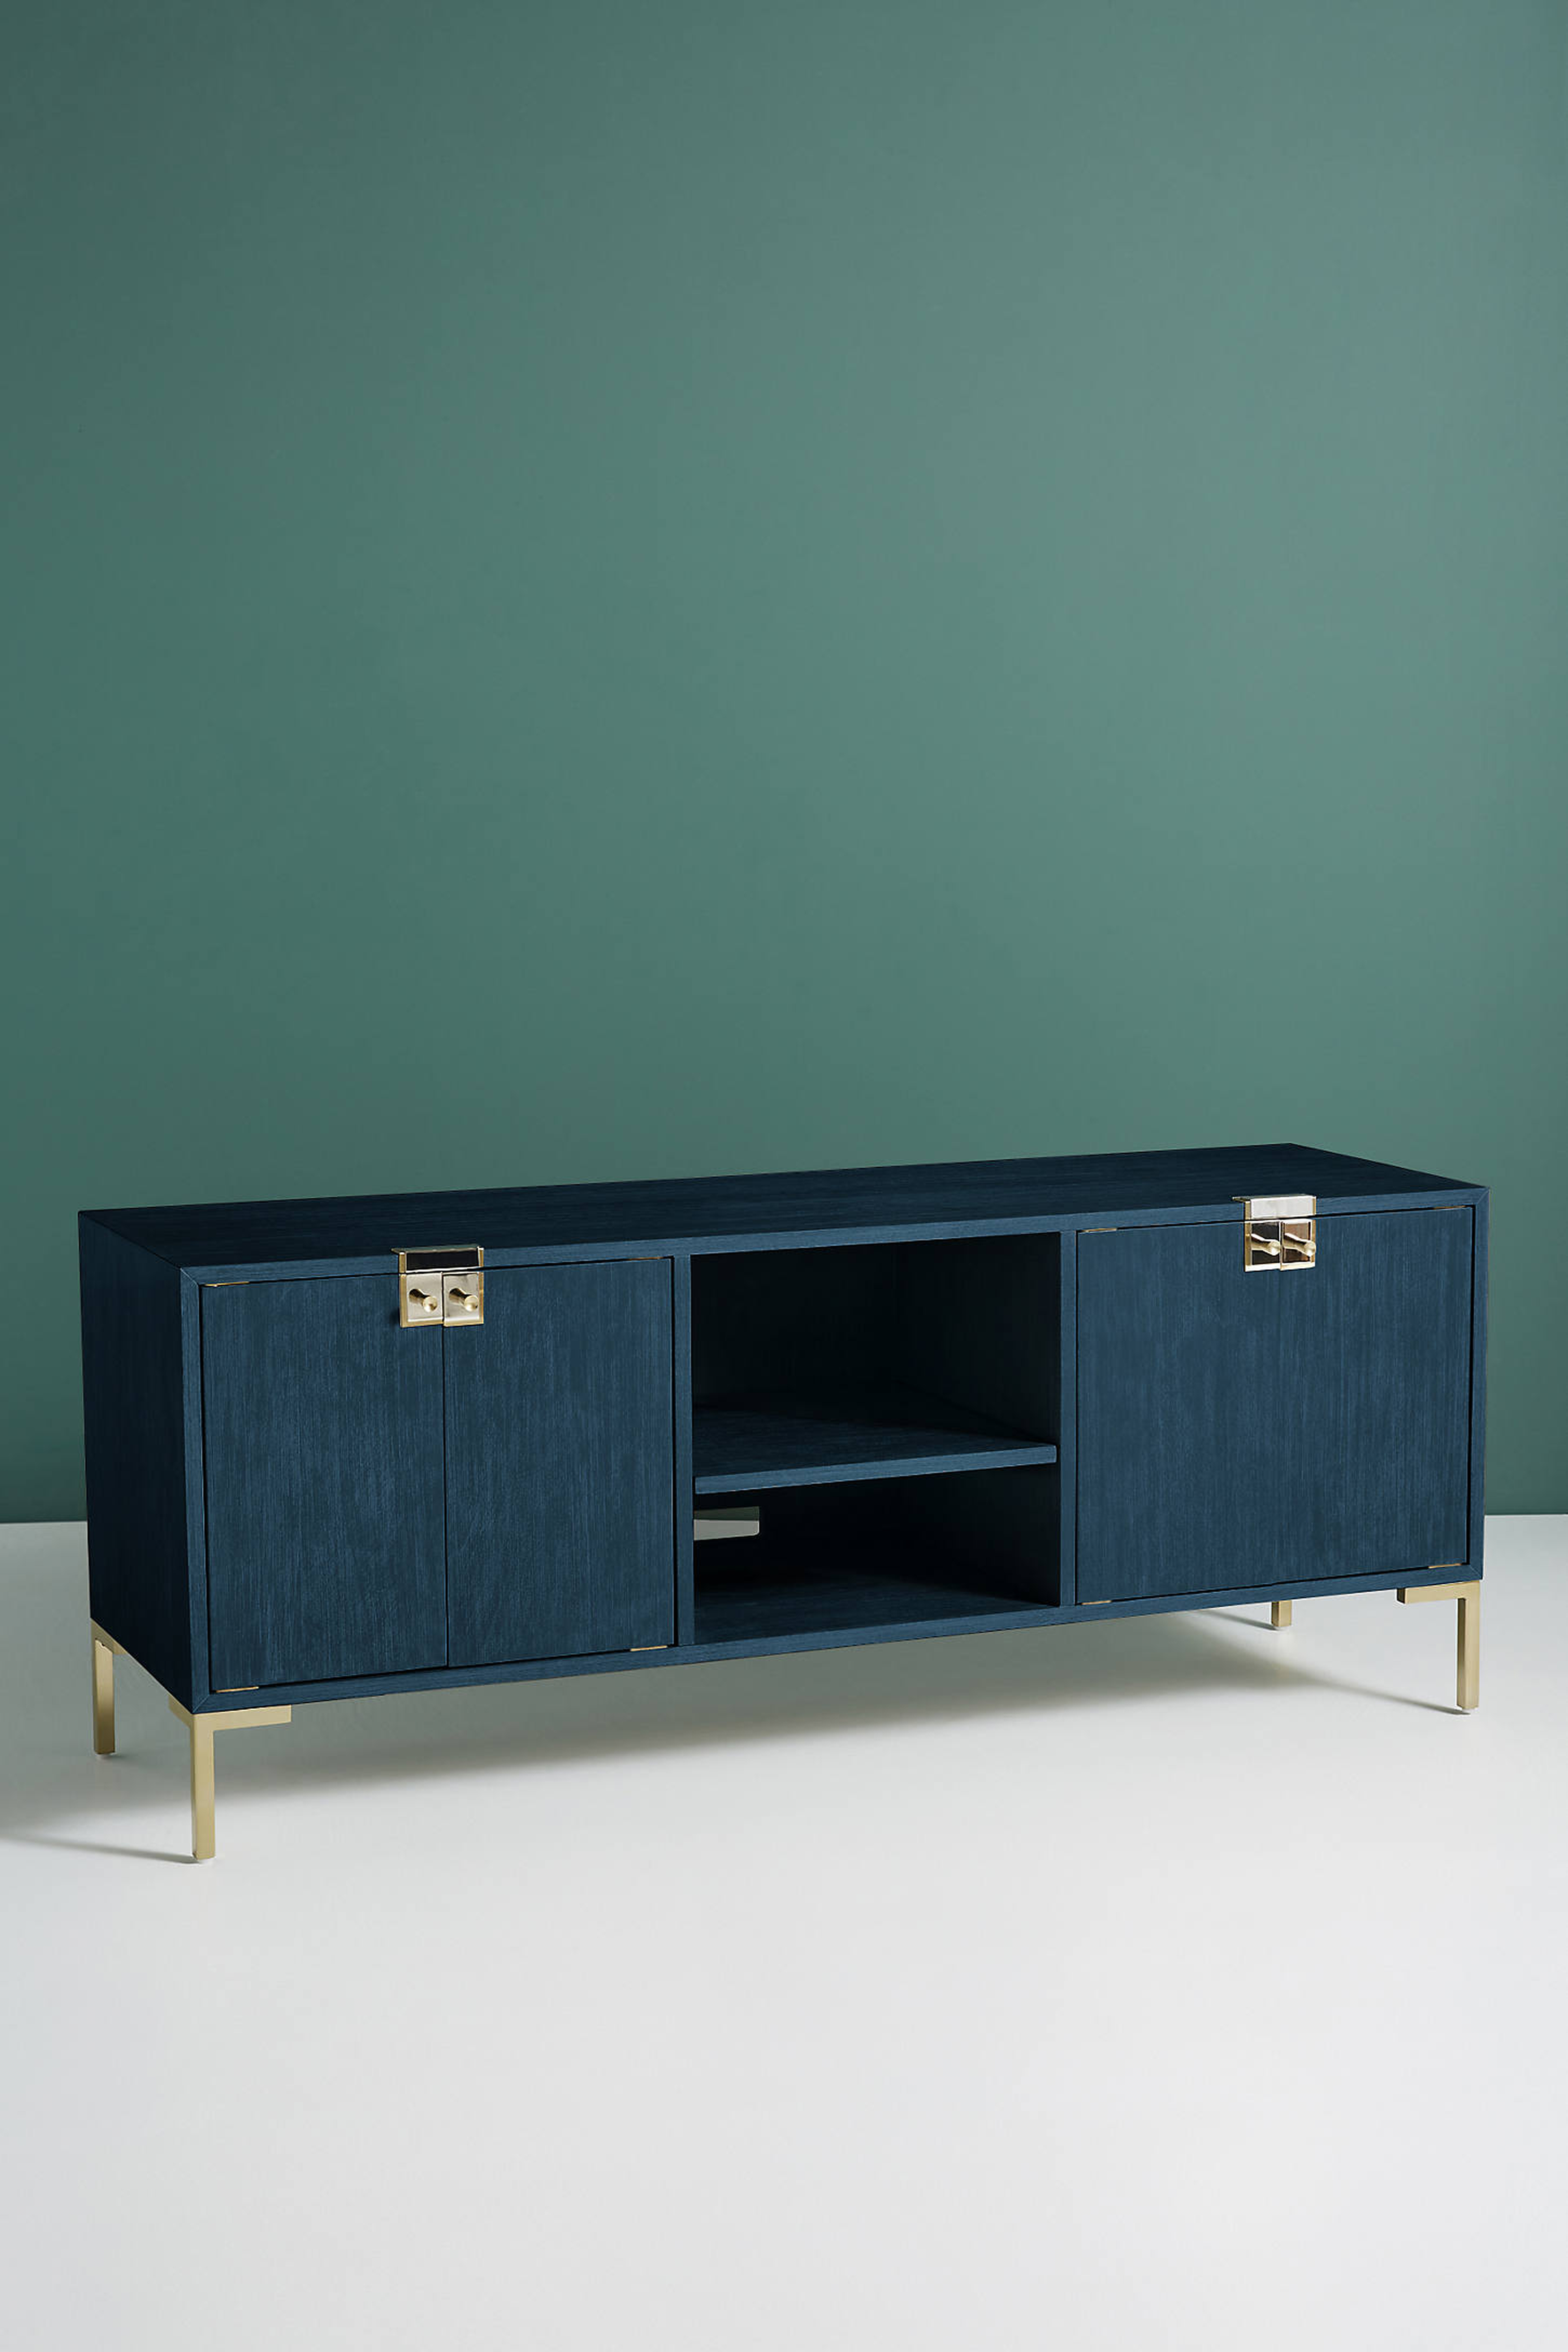 Ingram Media Console By Anthropologie in Blue - Anthropologie